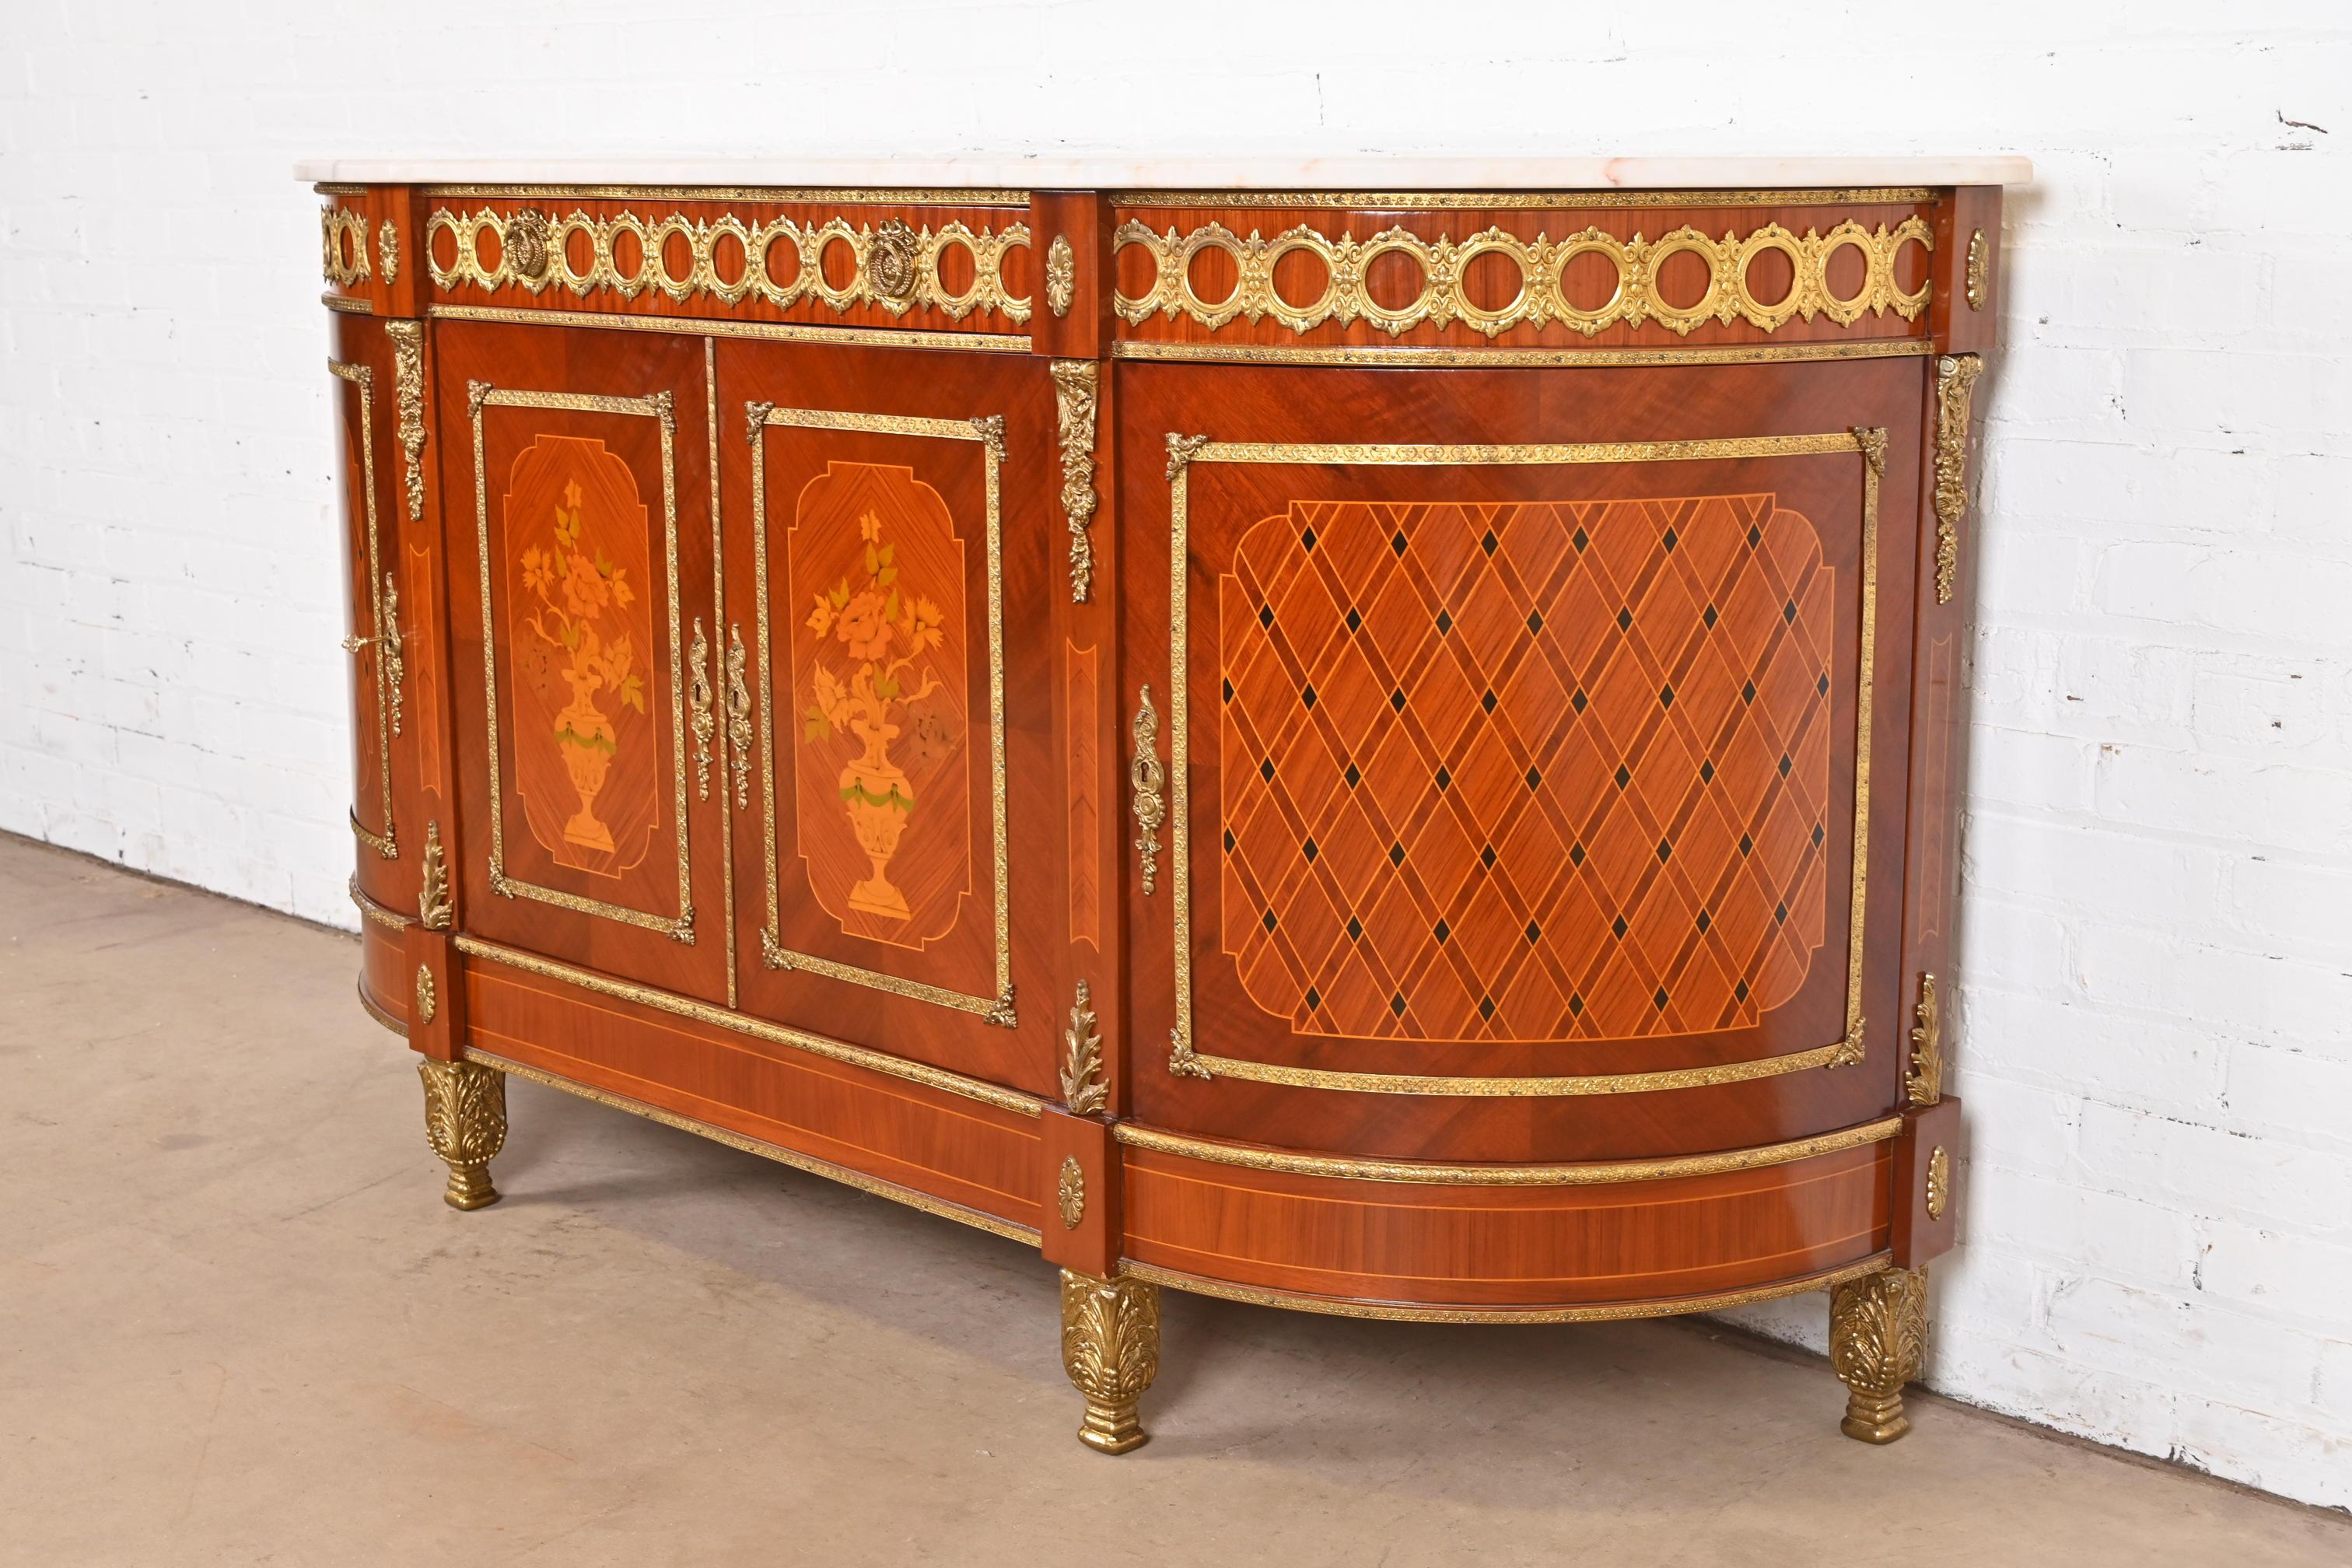 20th Century French Louis XVI Kingwood Inlaid Marquetry Marble Top Bronze Mounted Sideboard For Sale